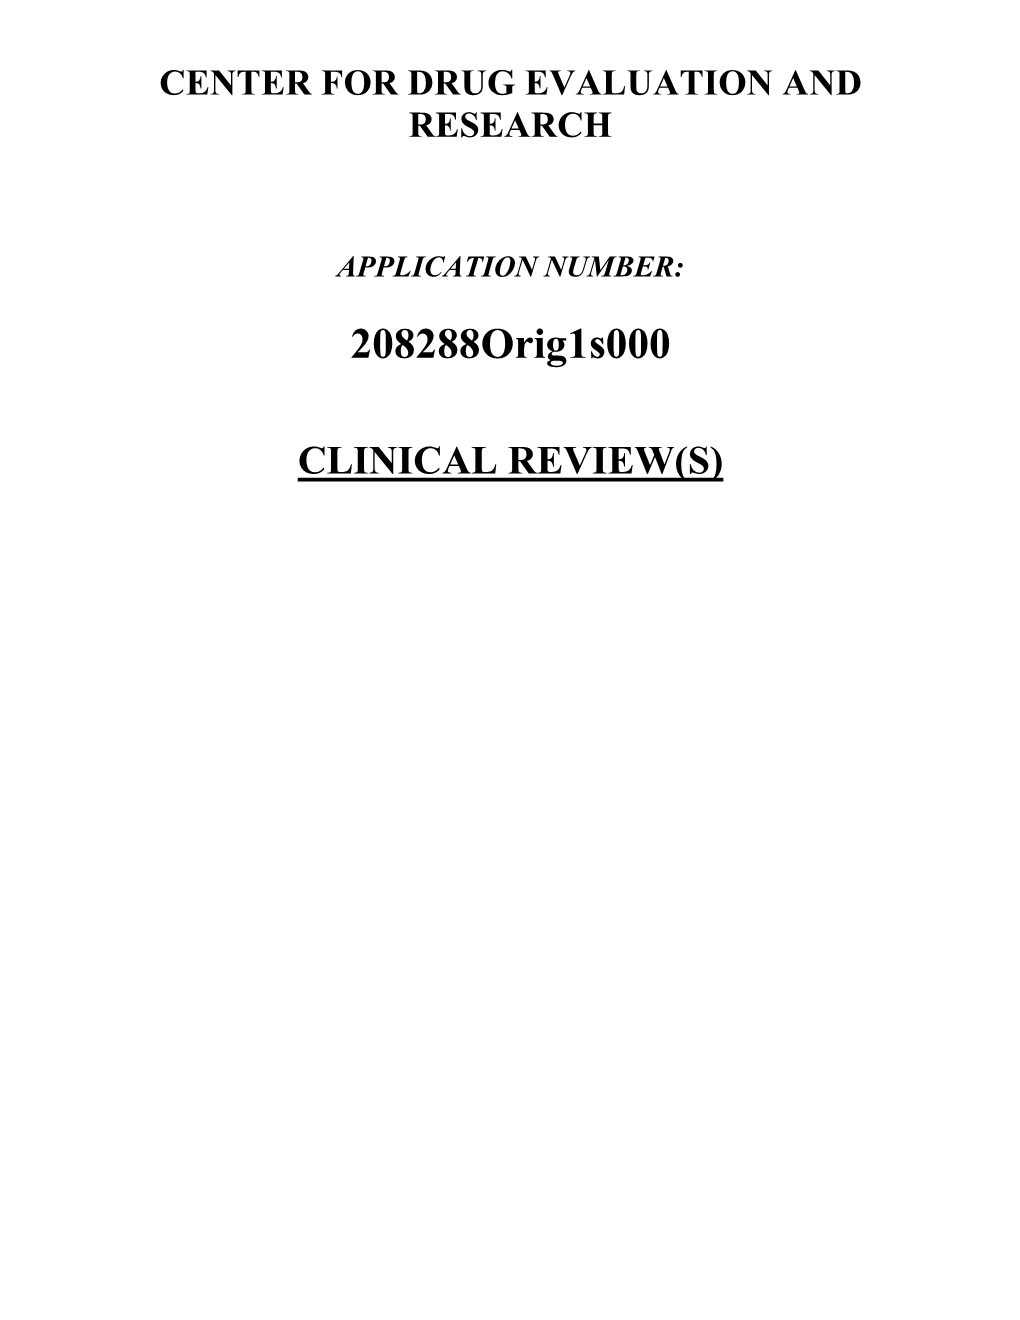 Clincal Review(S)